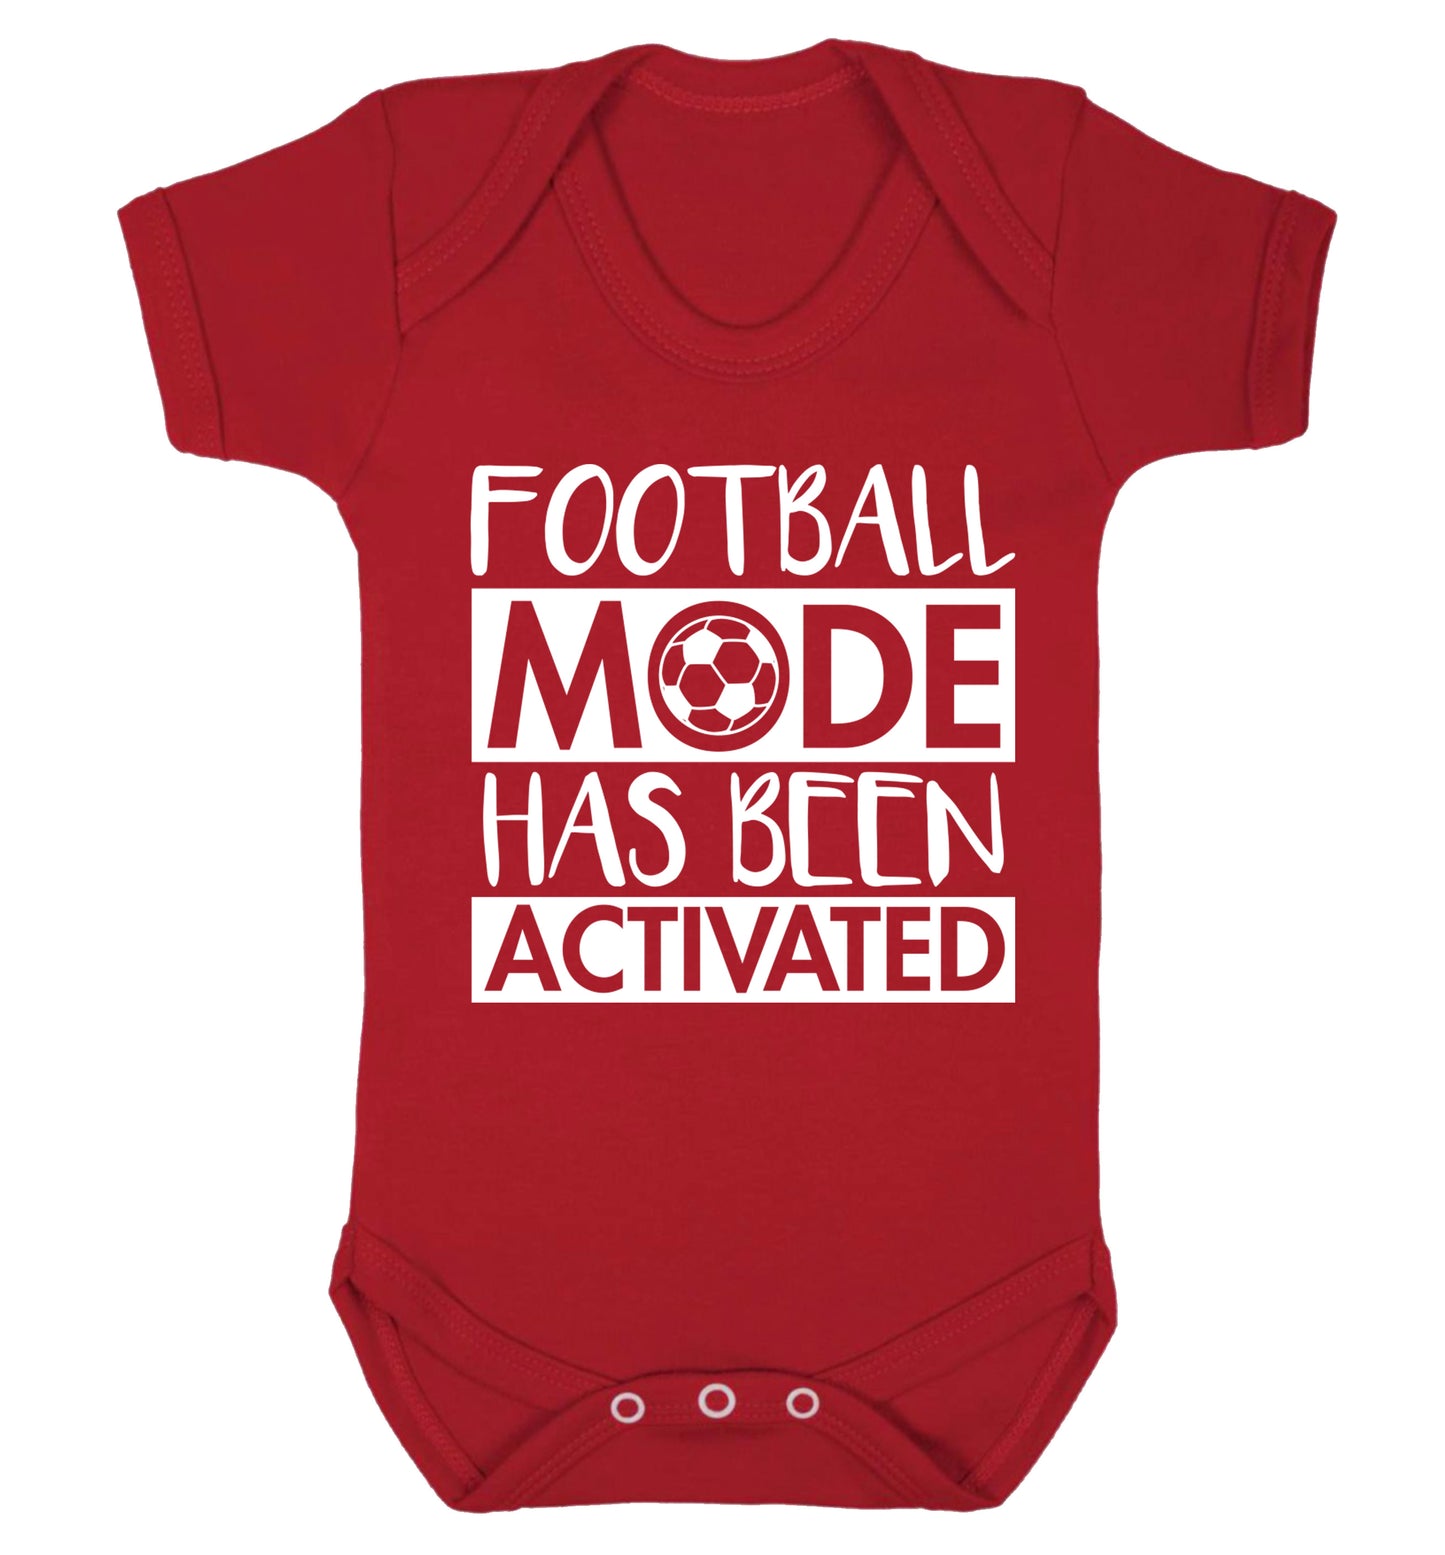 Football mode has been activated Baby Vest red 18-24 months